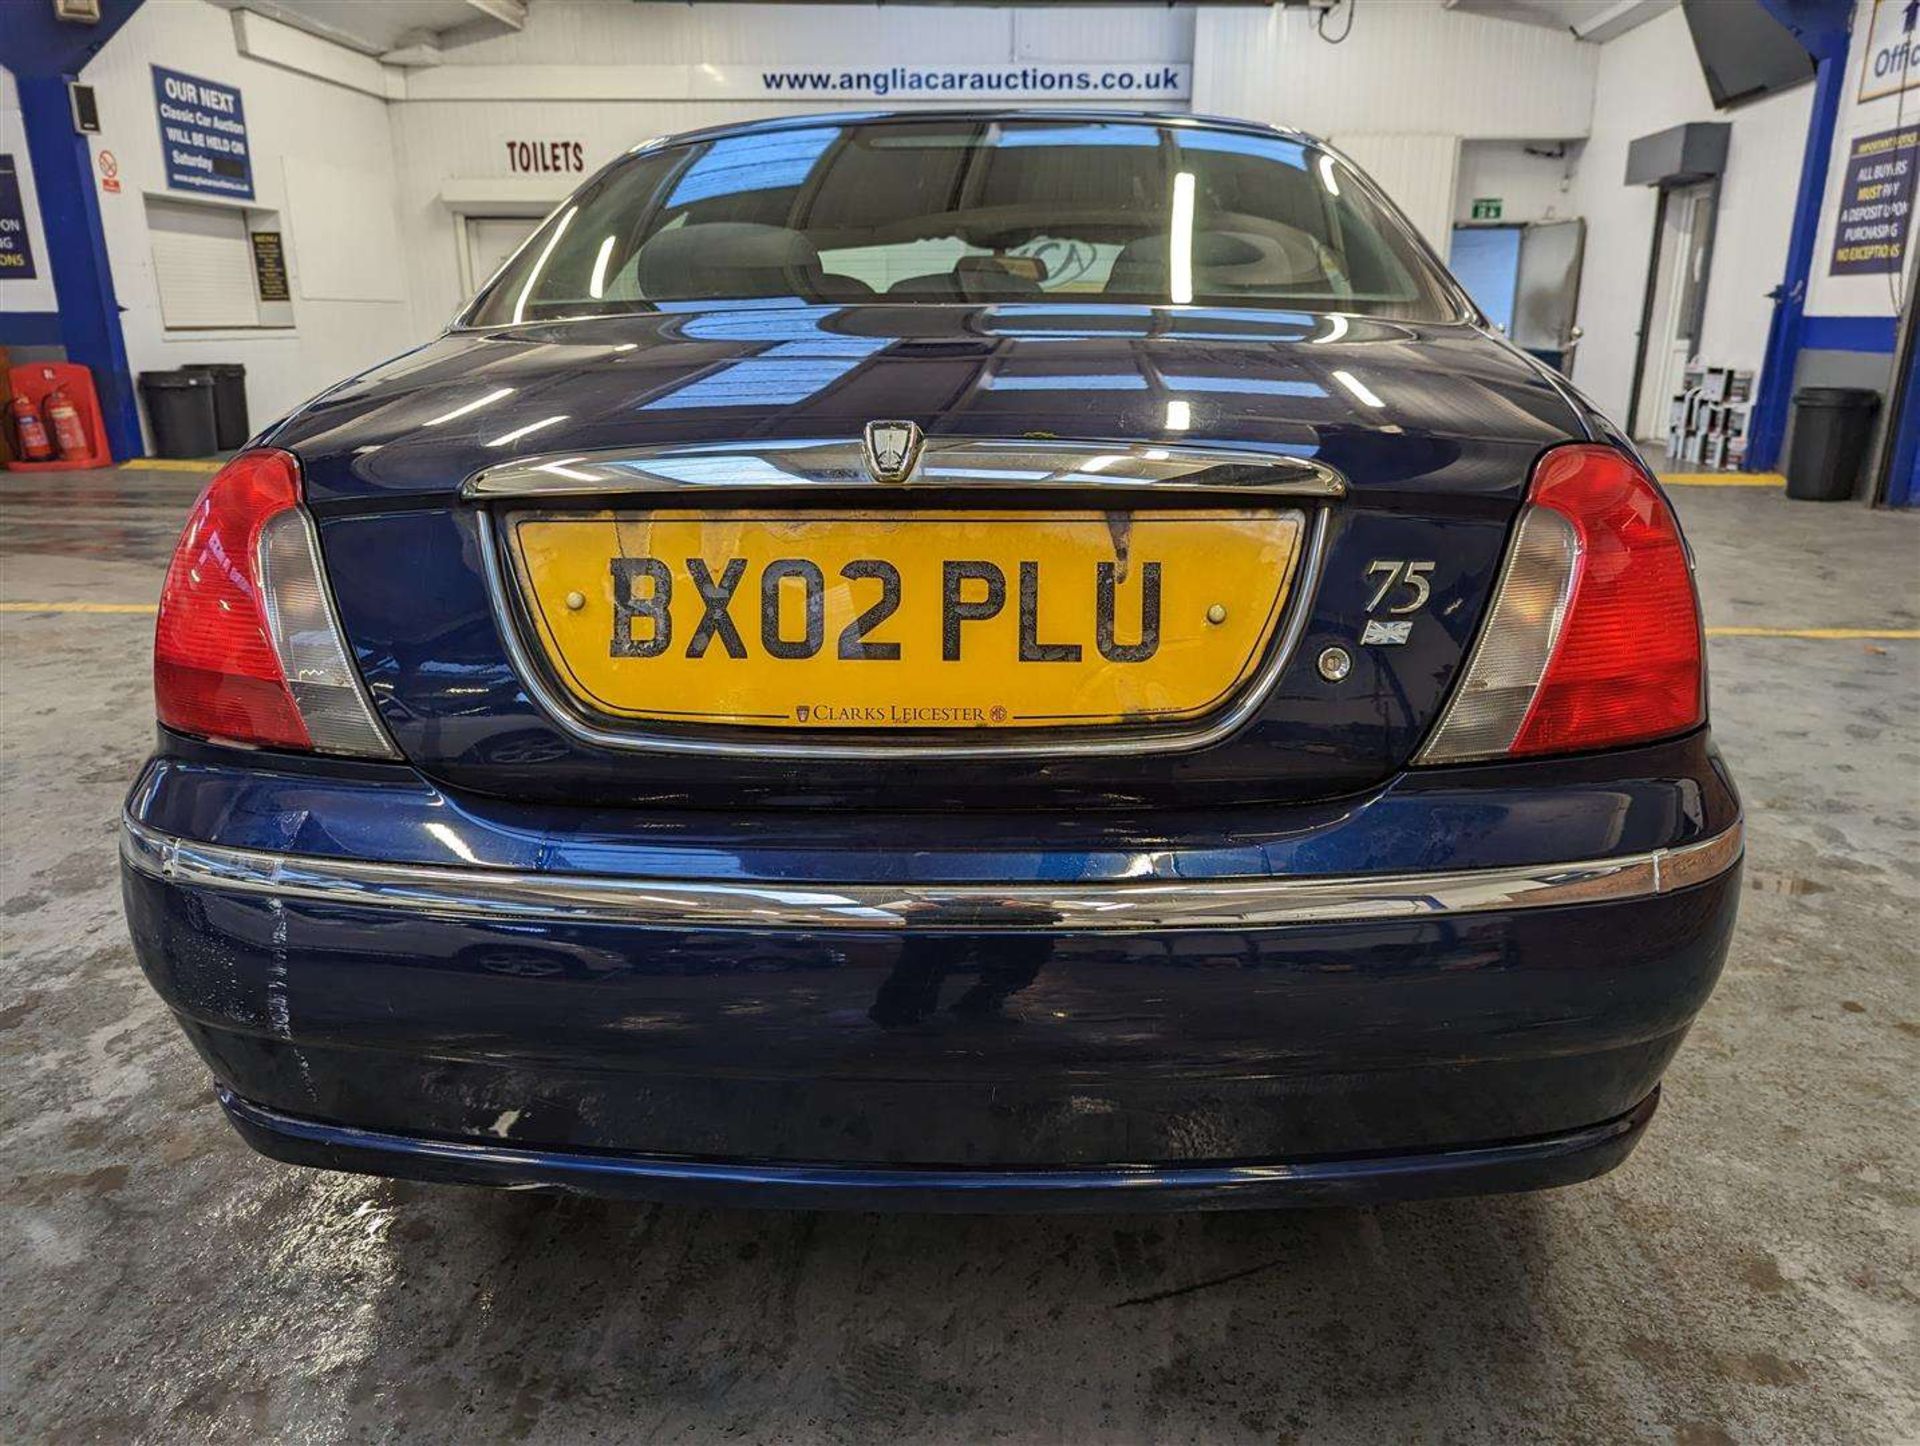 2002 ROVER 75 CLUB SE - Image 3 of 25